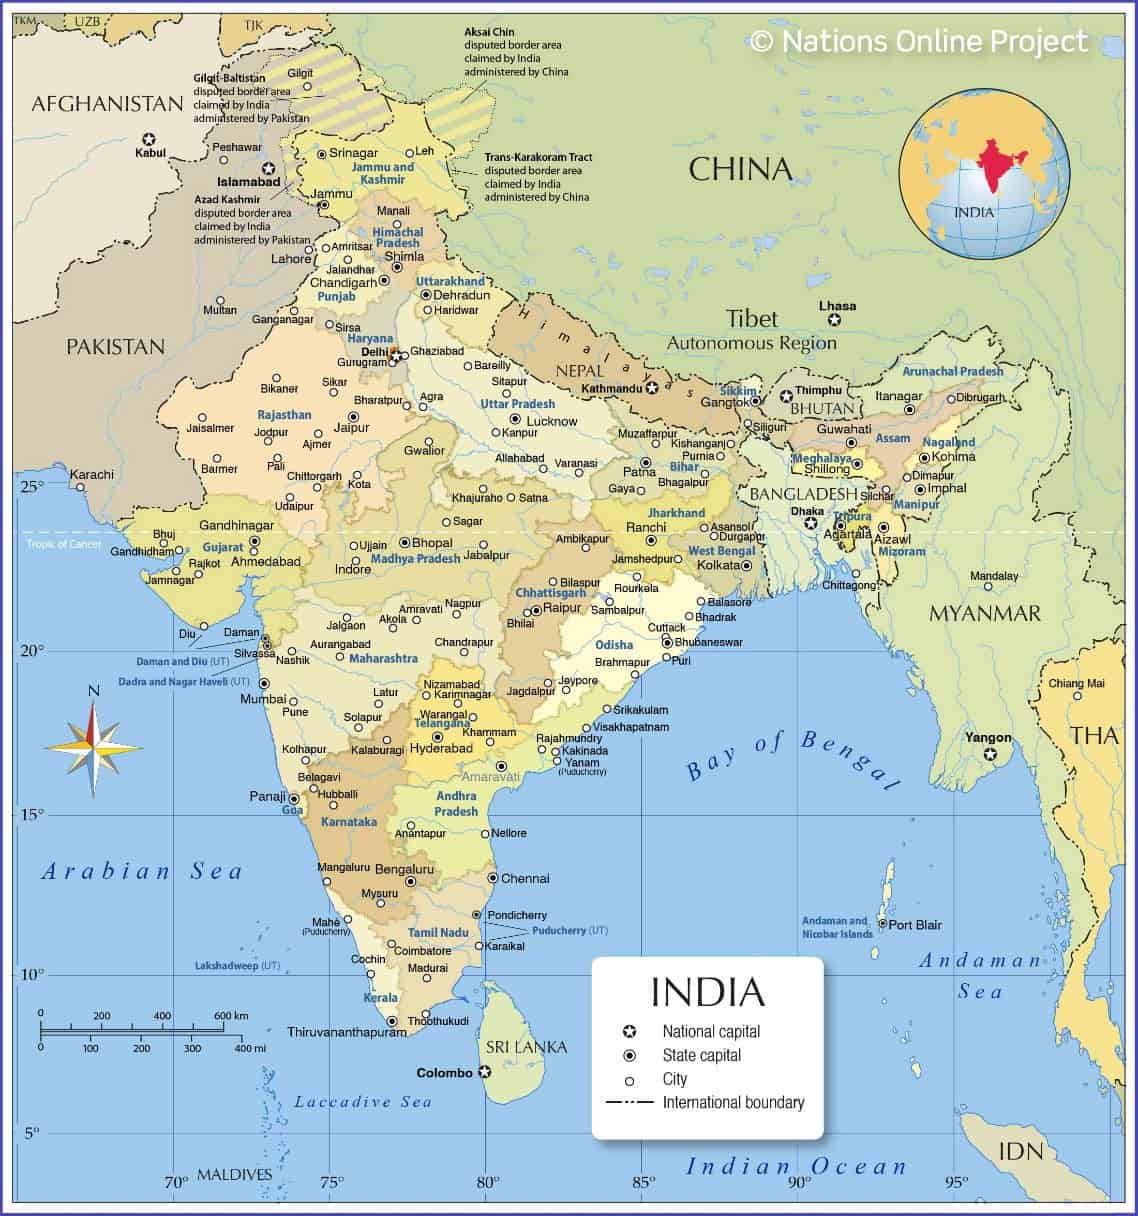 Map showing India and other parts of South Asia. 